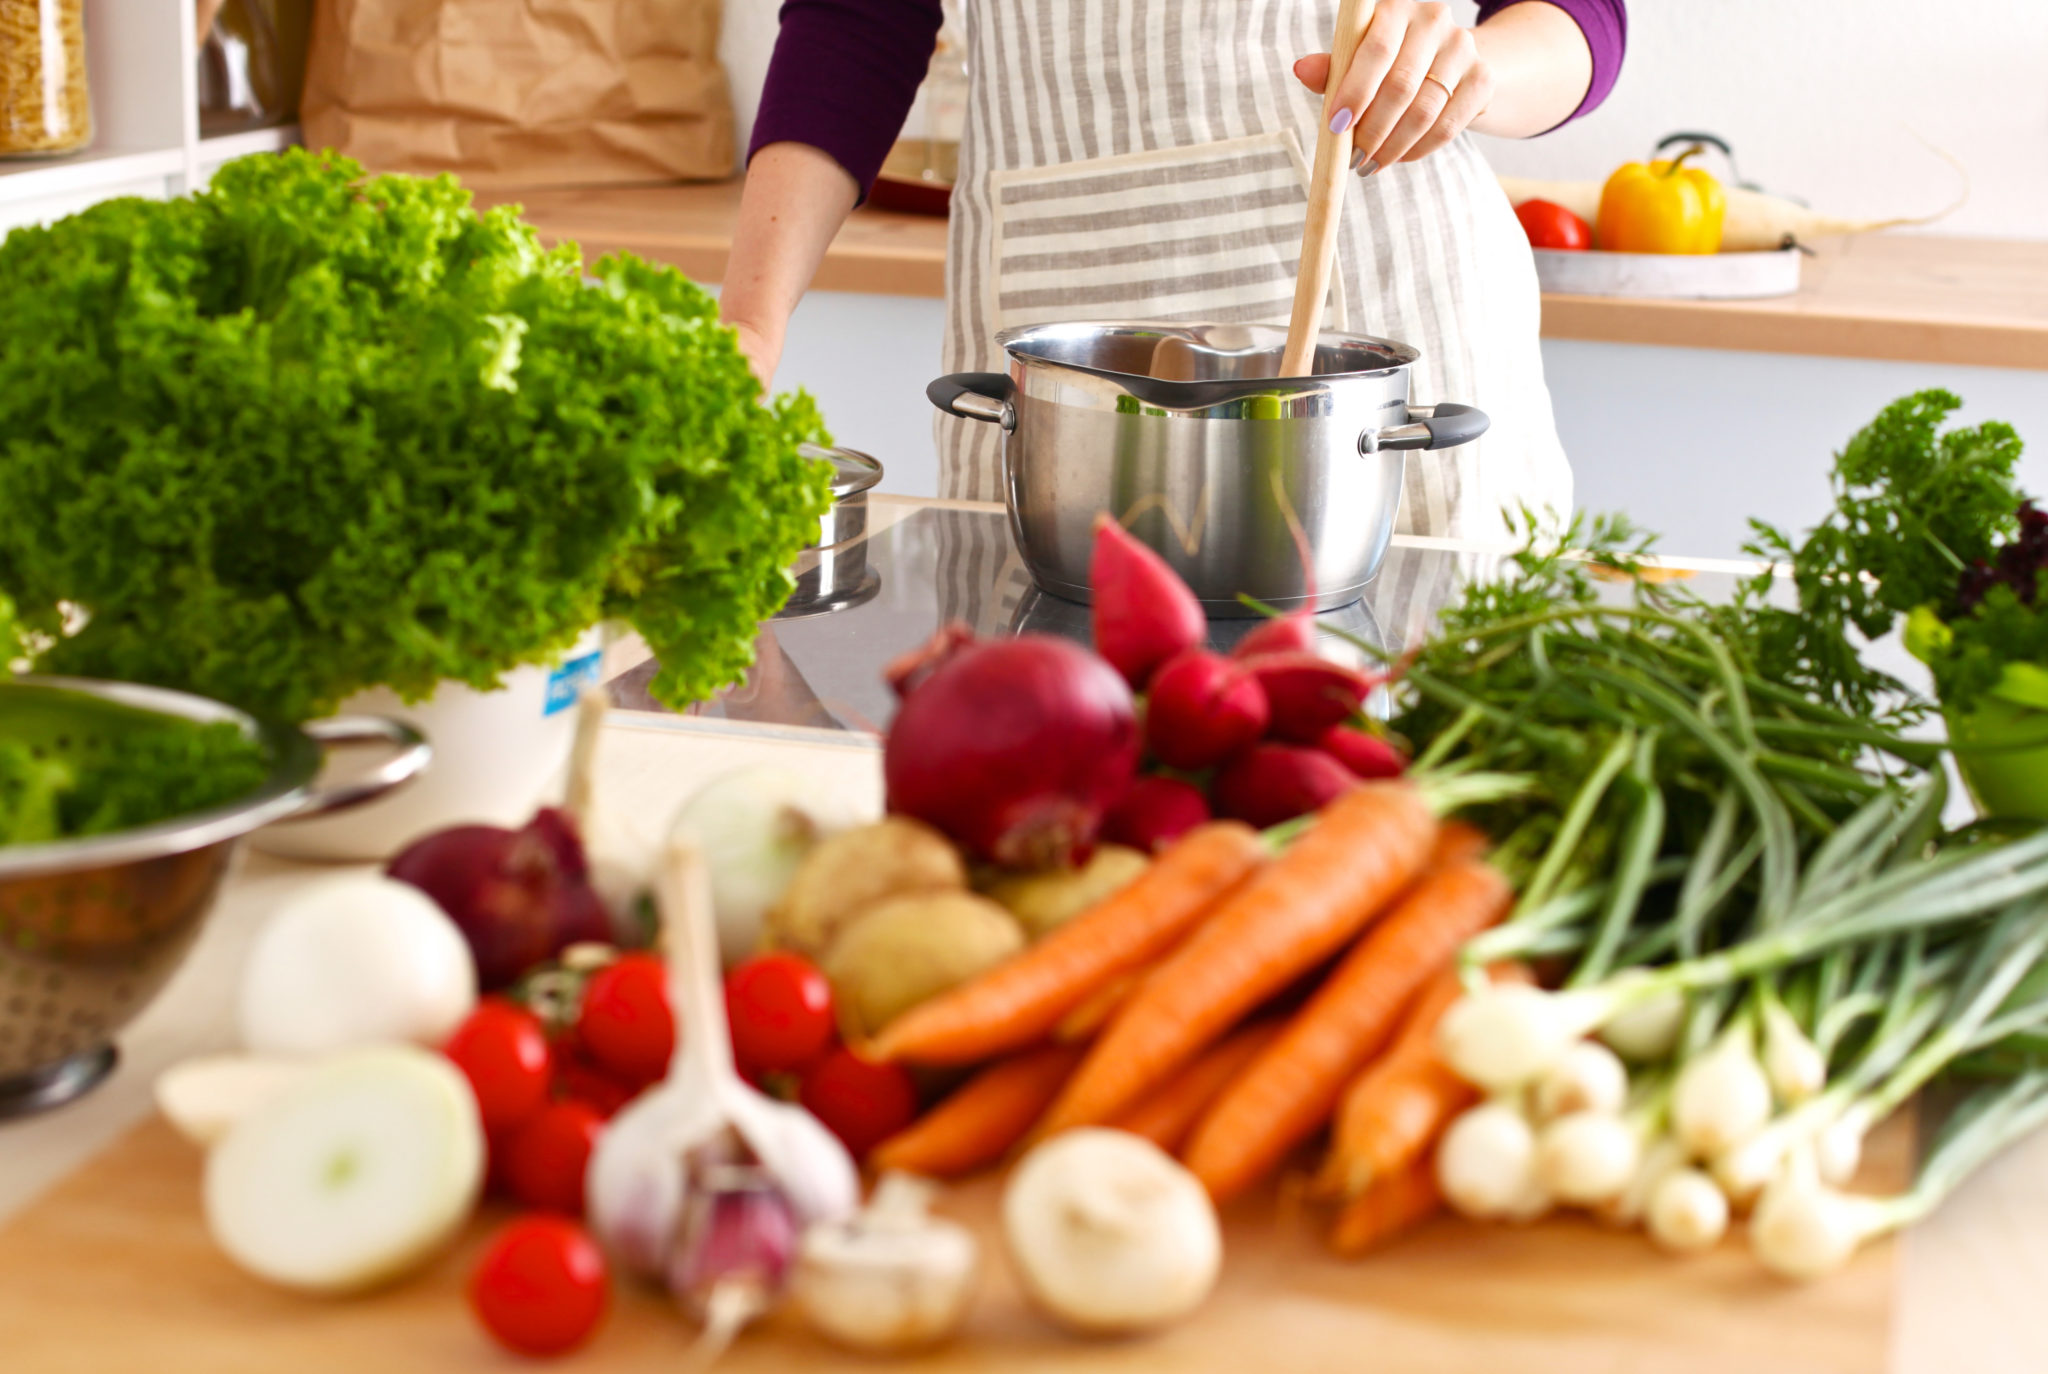 Make How you Cook as Healthy as What you Cook